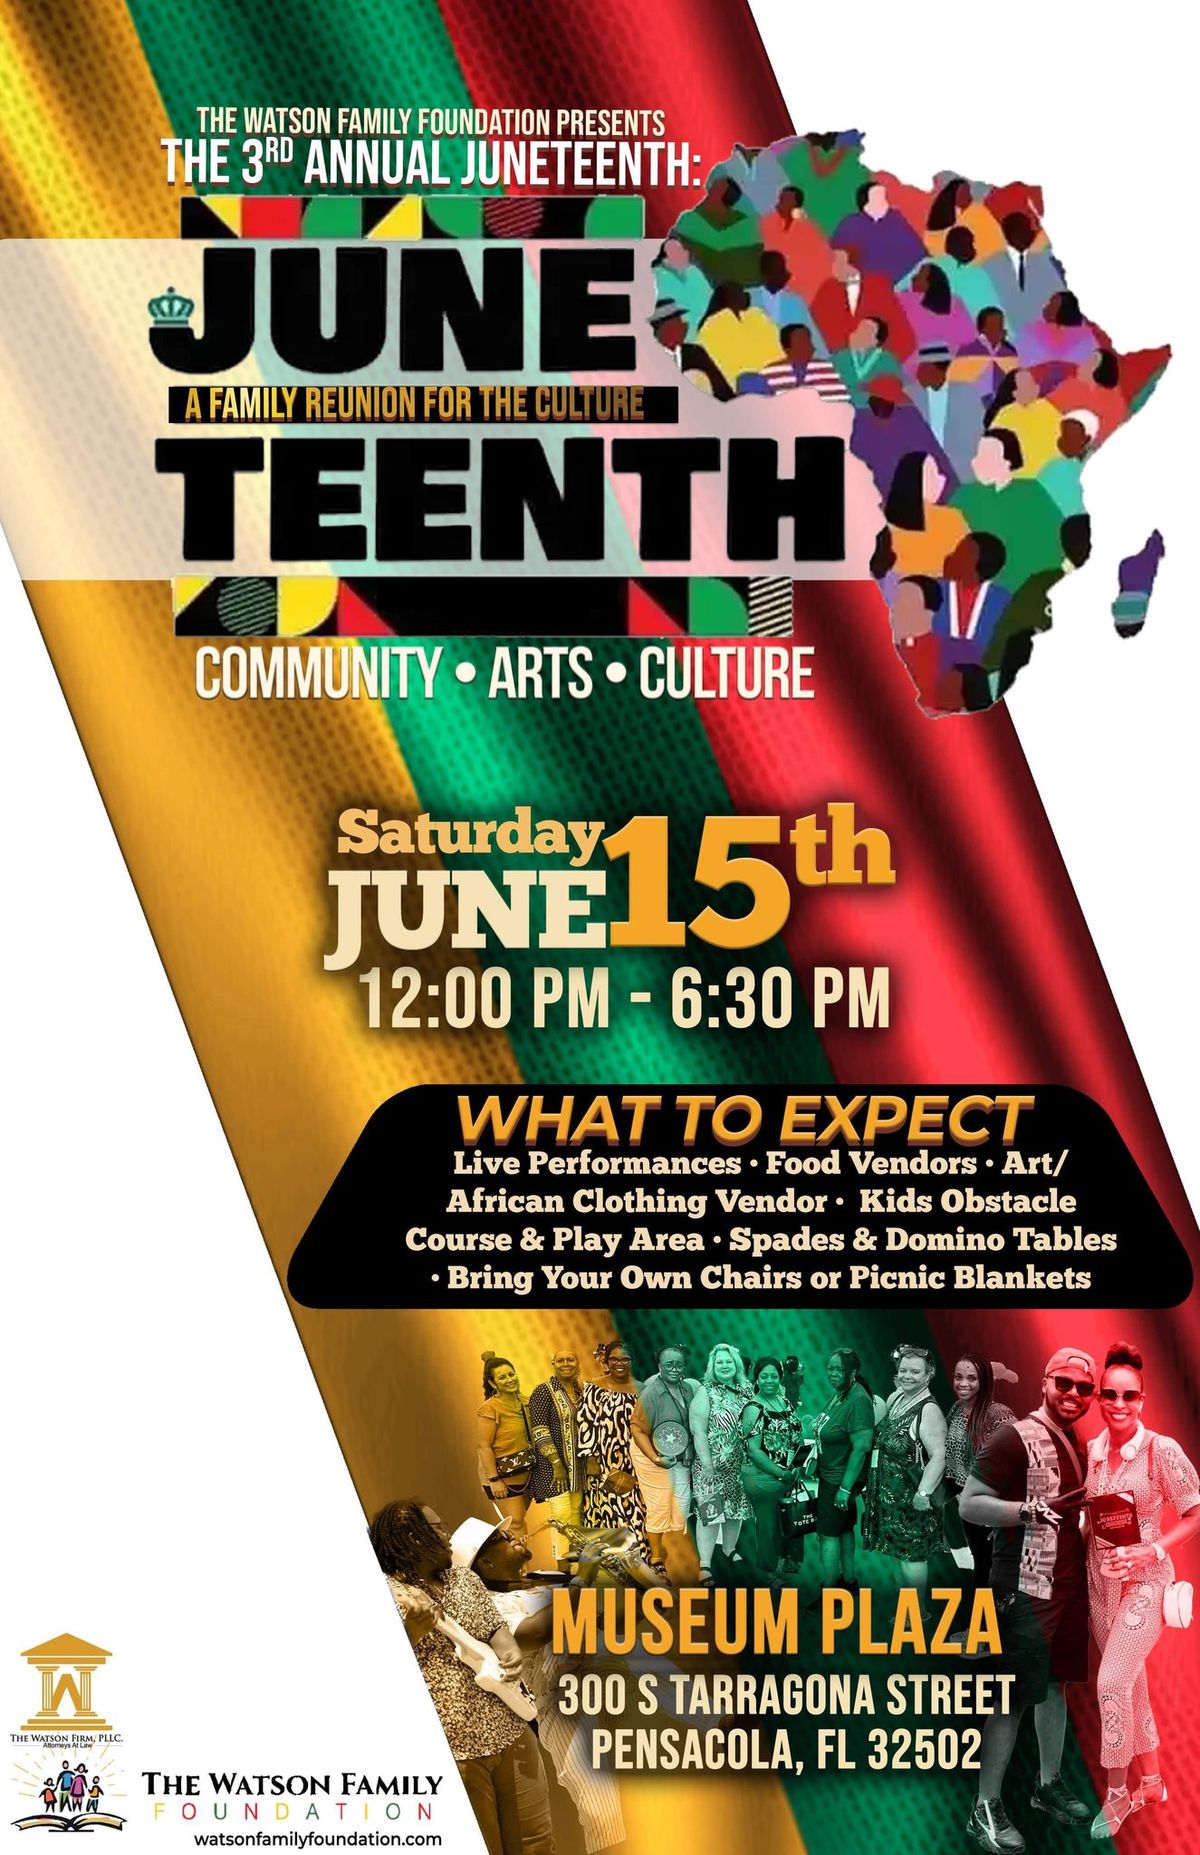 The Watson Family Foundation Presents the 3rd Annual Juneteenth: A Family Reunion for the Culture